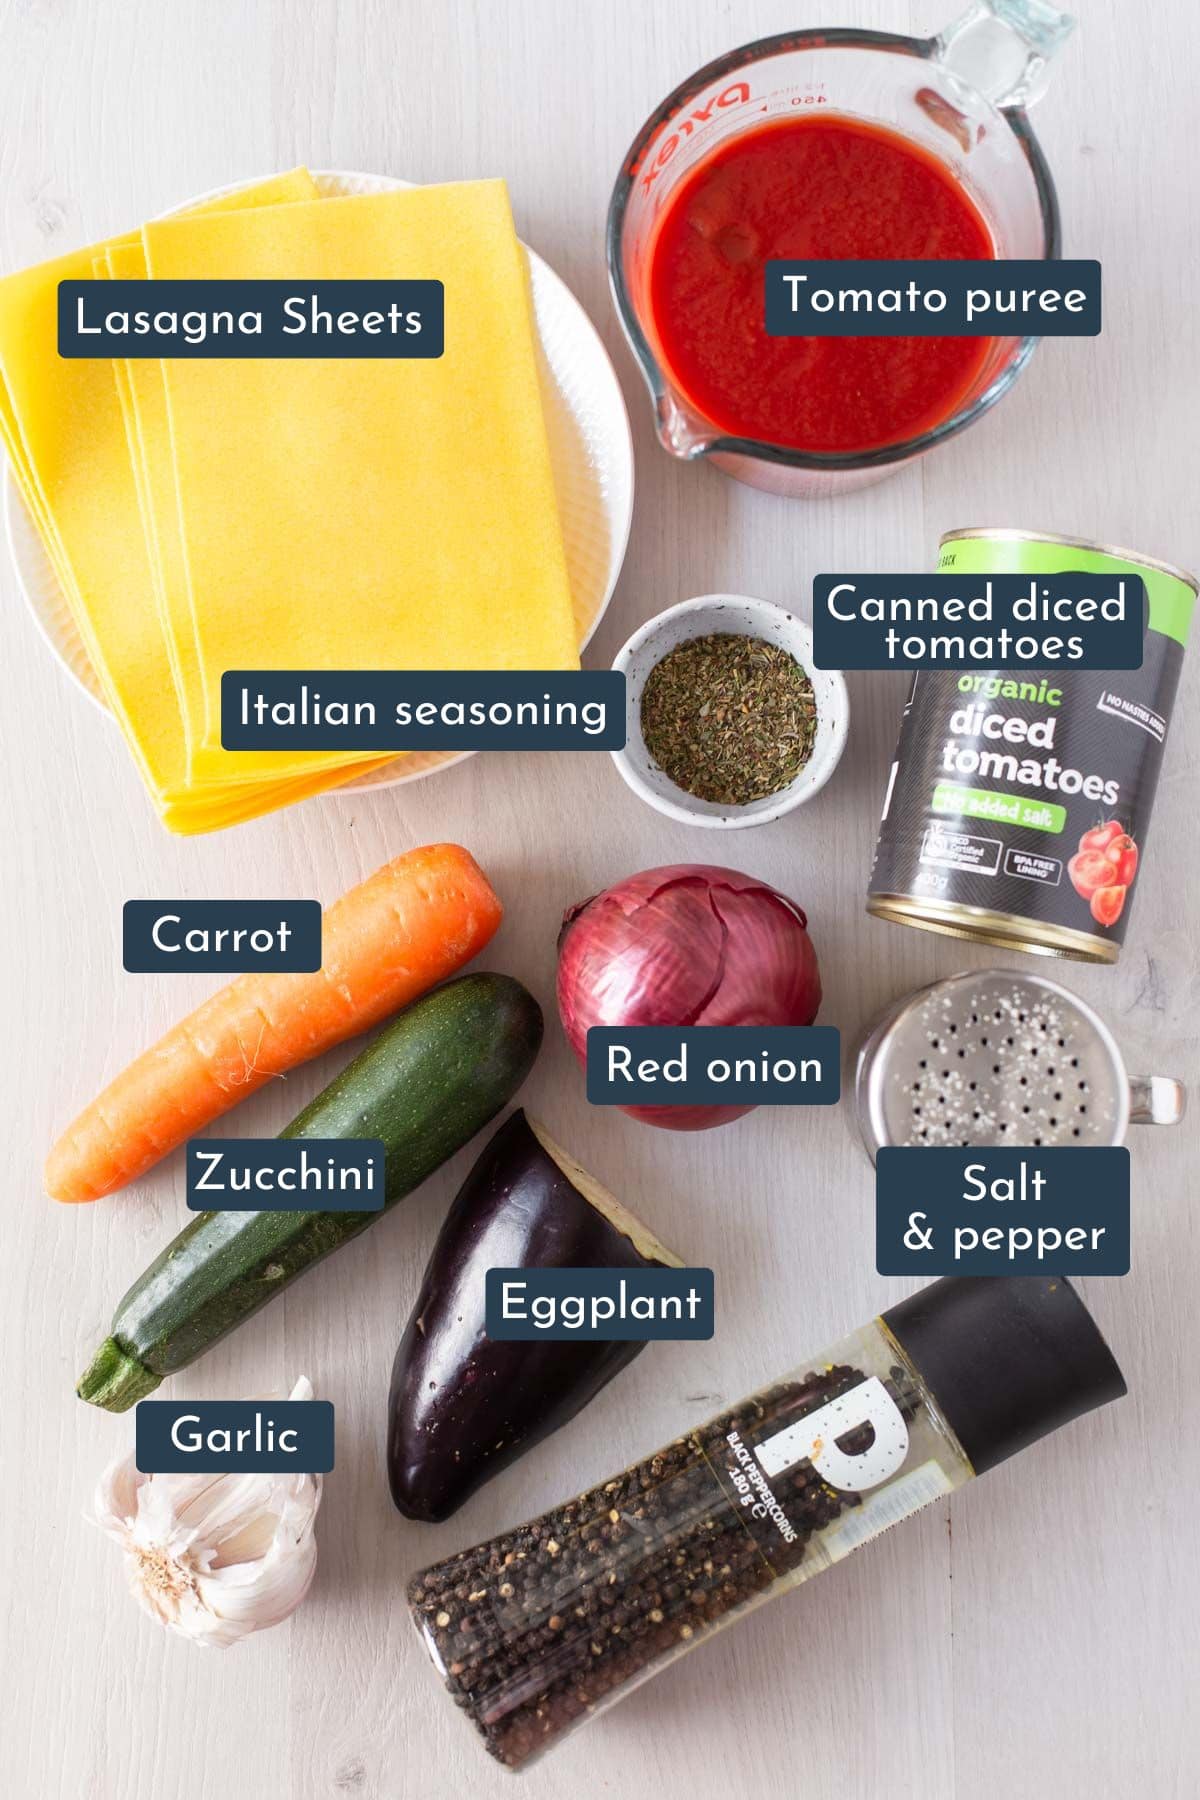 Individual ingredients laid out to make vegetable tomato mixture is lasagna sheets, tomato puree, canned diced tomatoes, dried Italian seasoning, red onion, carrot, zucchini, eggplant, garlic, salt and pepper.